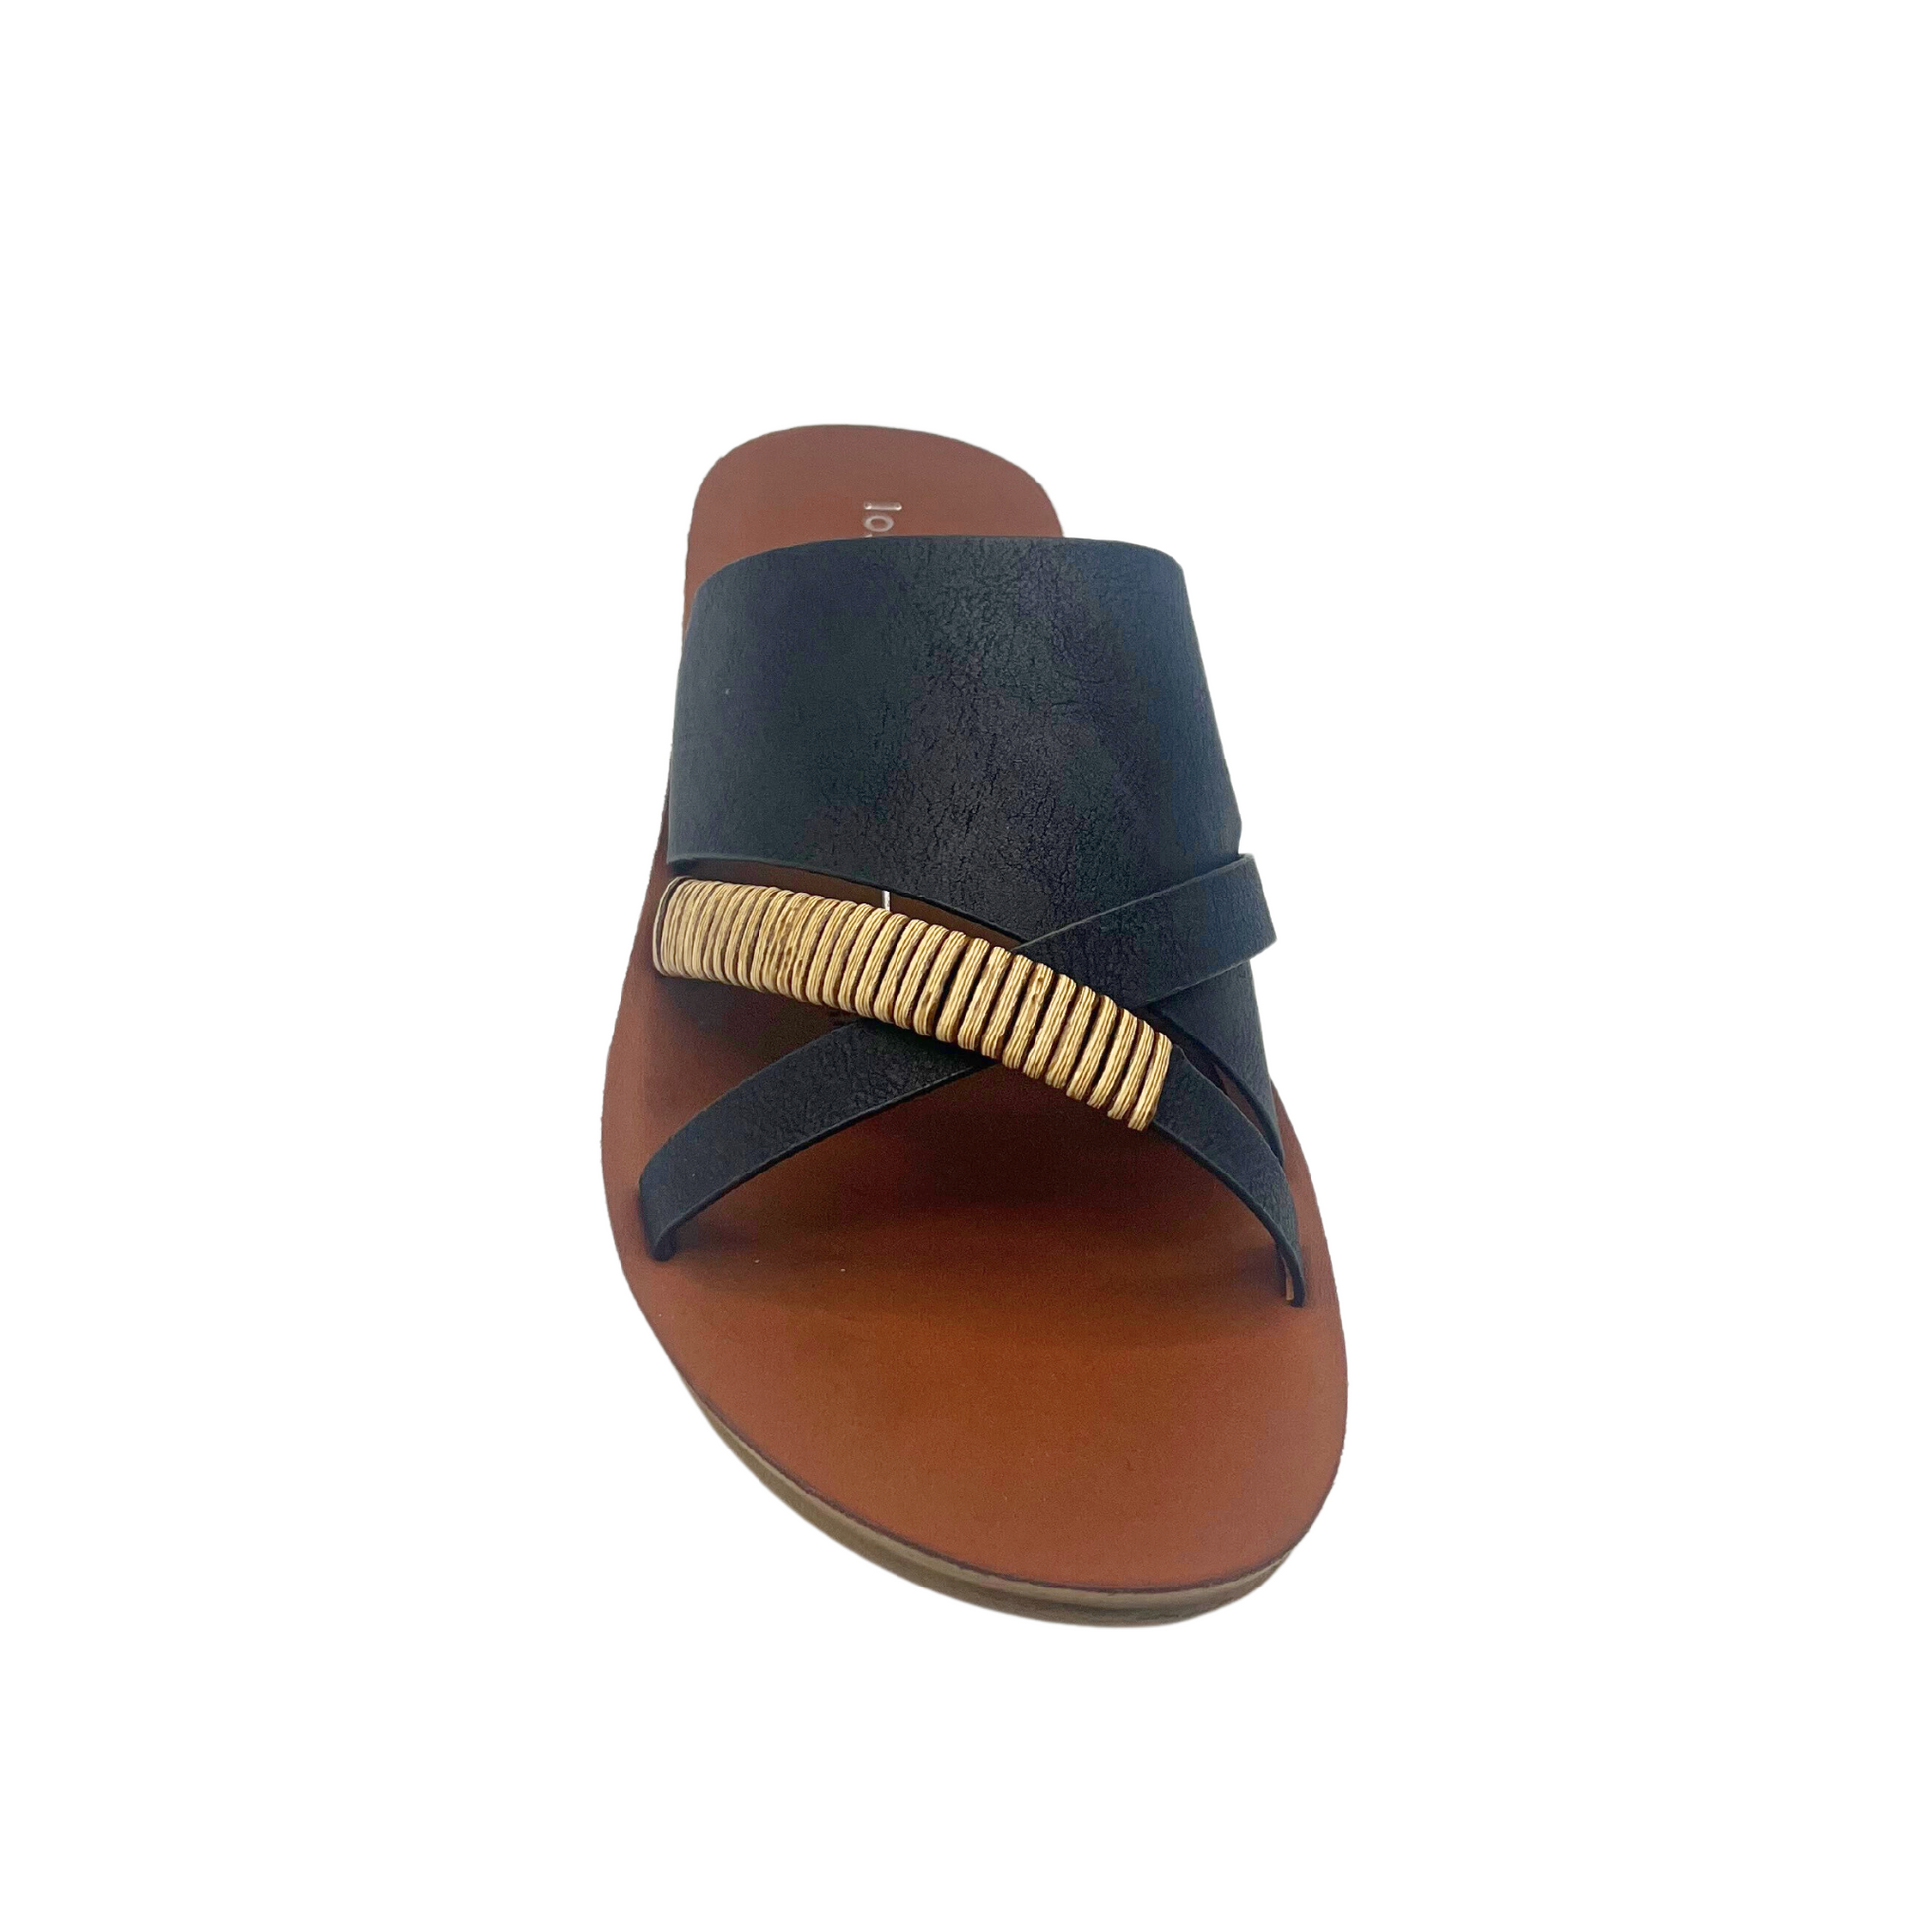 Top down view of a slip on sandal in black leather with a metallic detail on one of the front straps